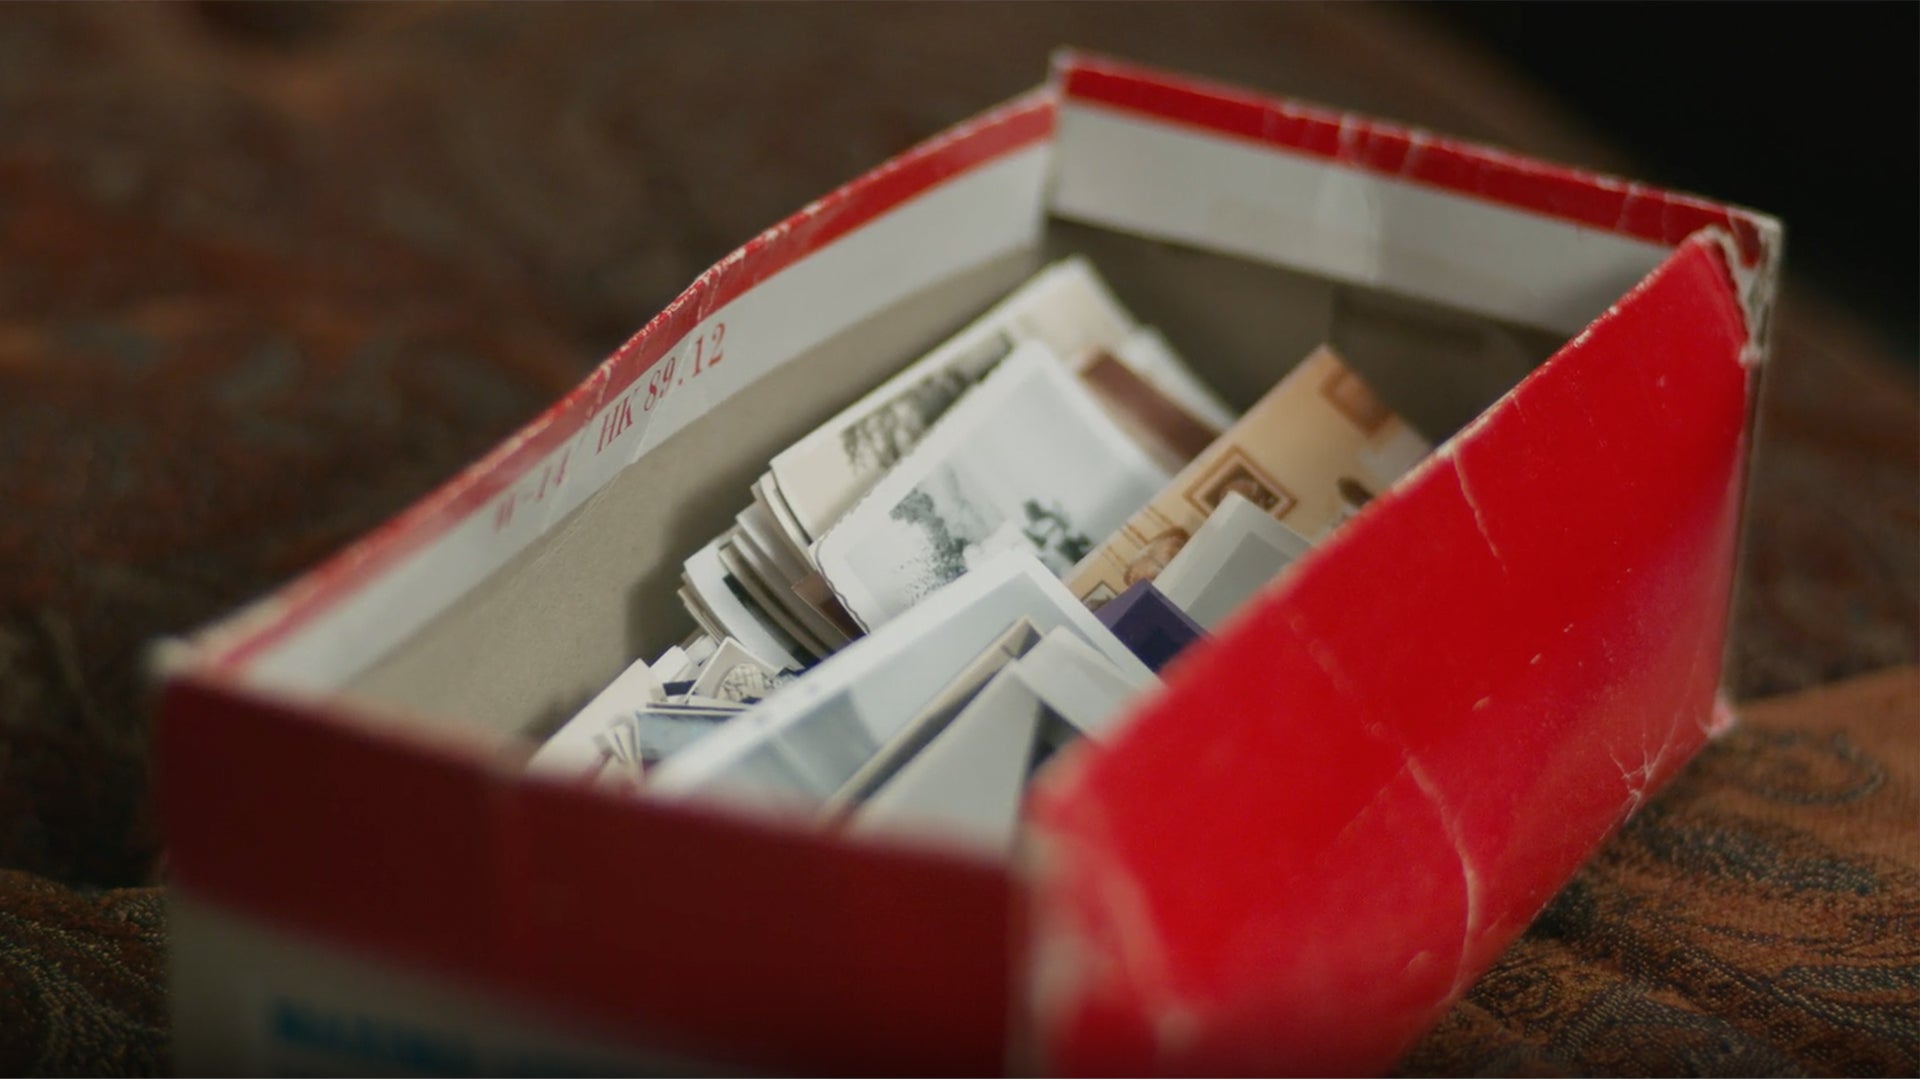 A shoebox full of old photos.